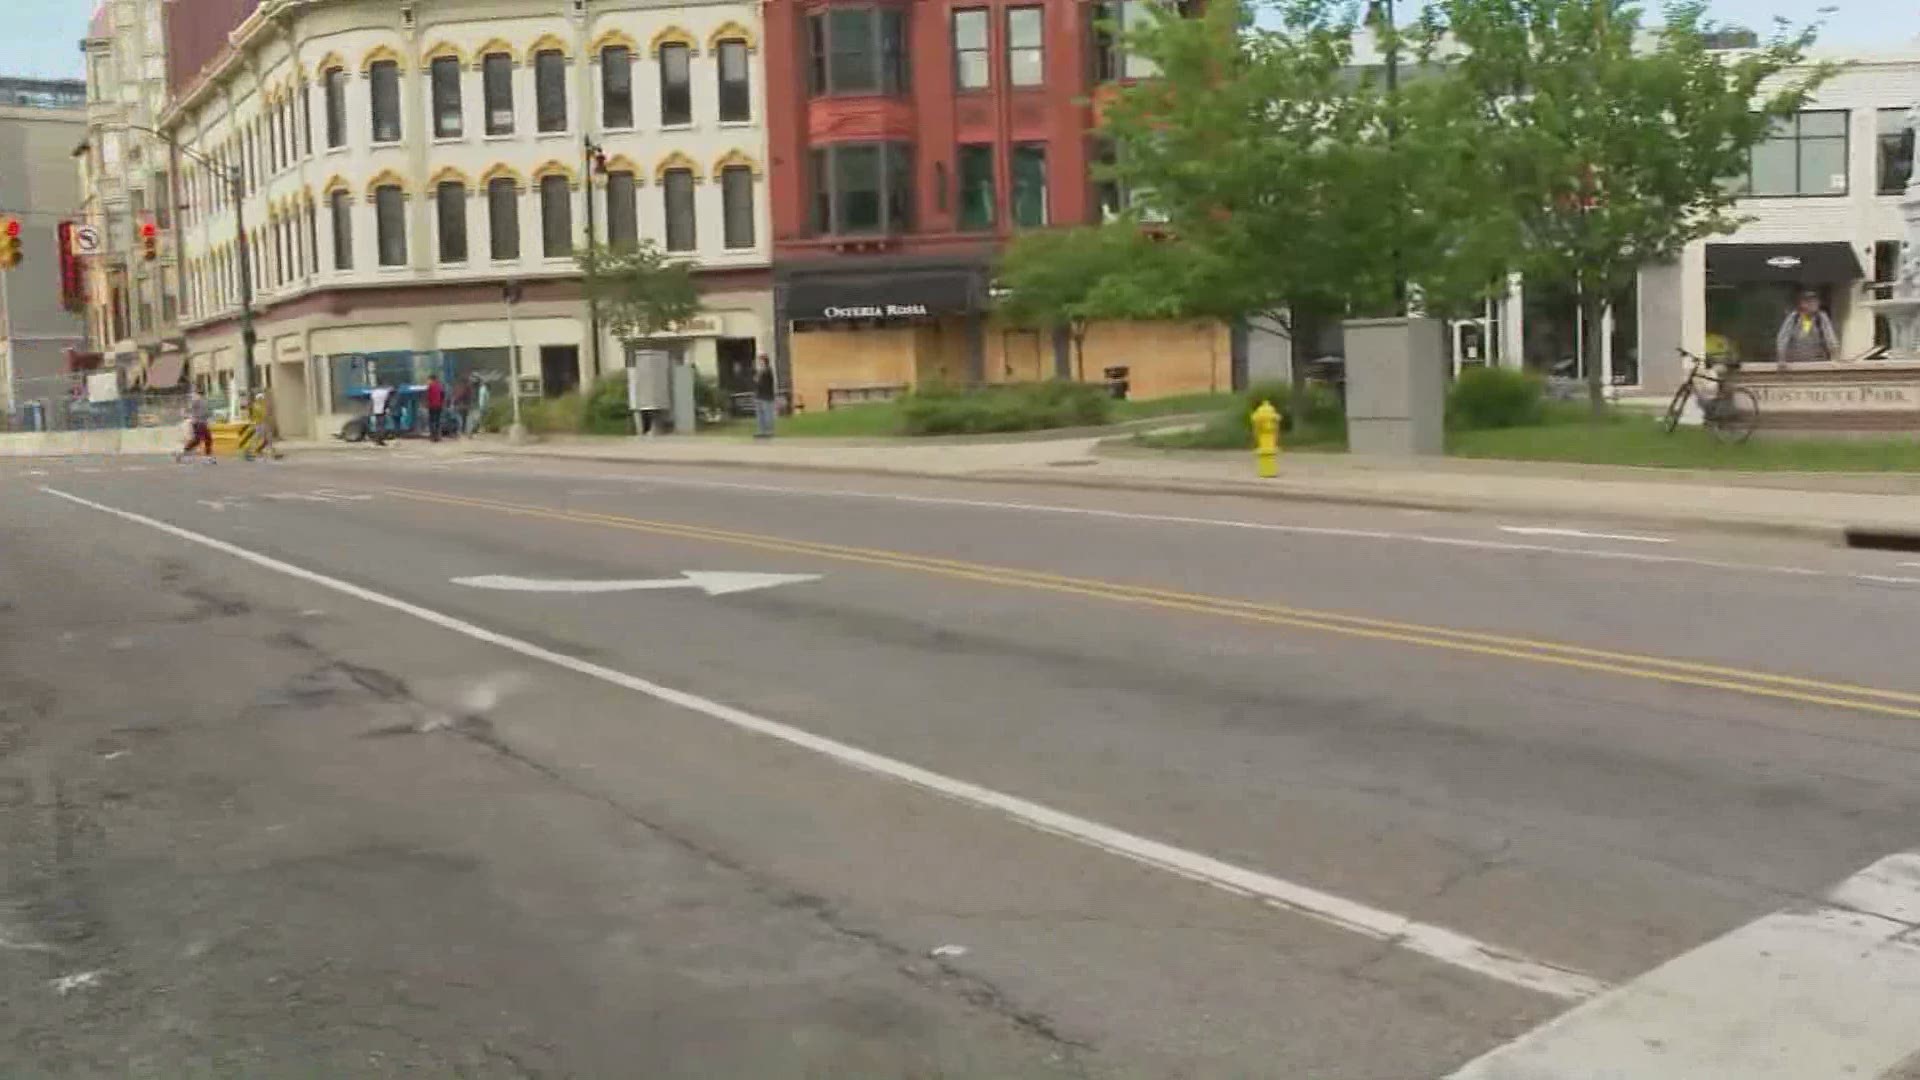 At 7:00 p.m. Sunday a curfew went into effect in Grand Rapids.